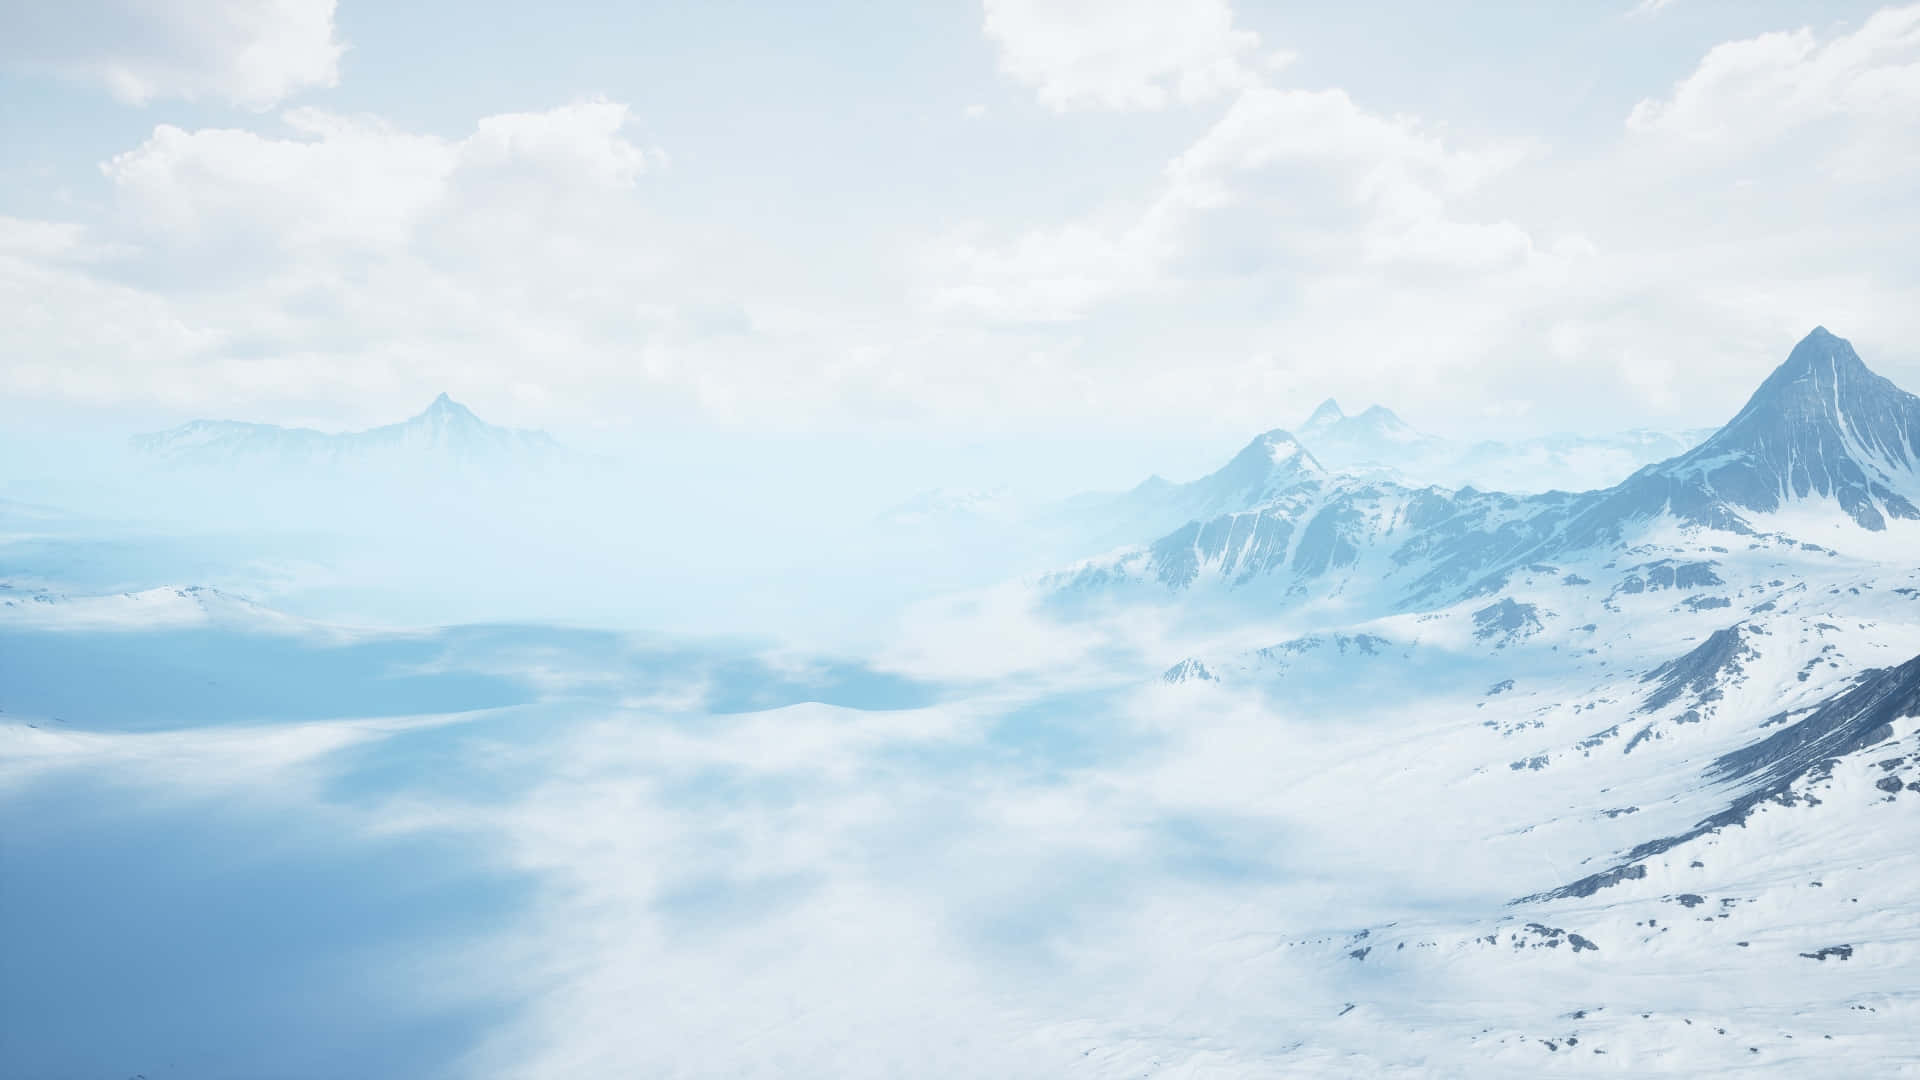 Take In The Beautiful View From A Snowy Mountain Top